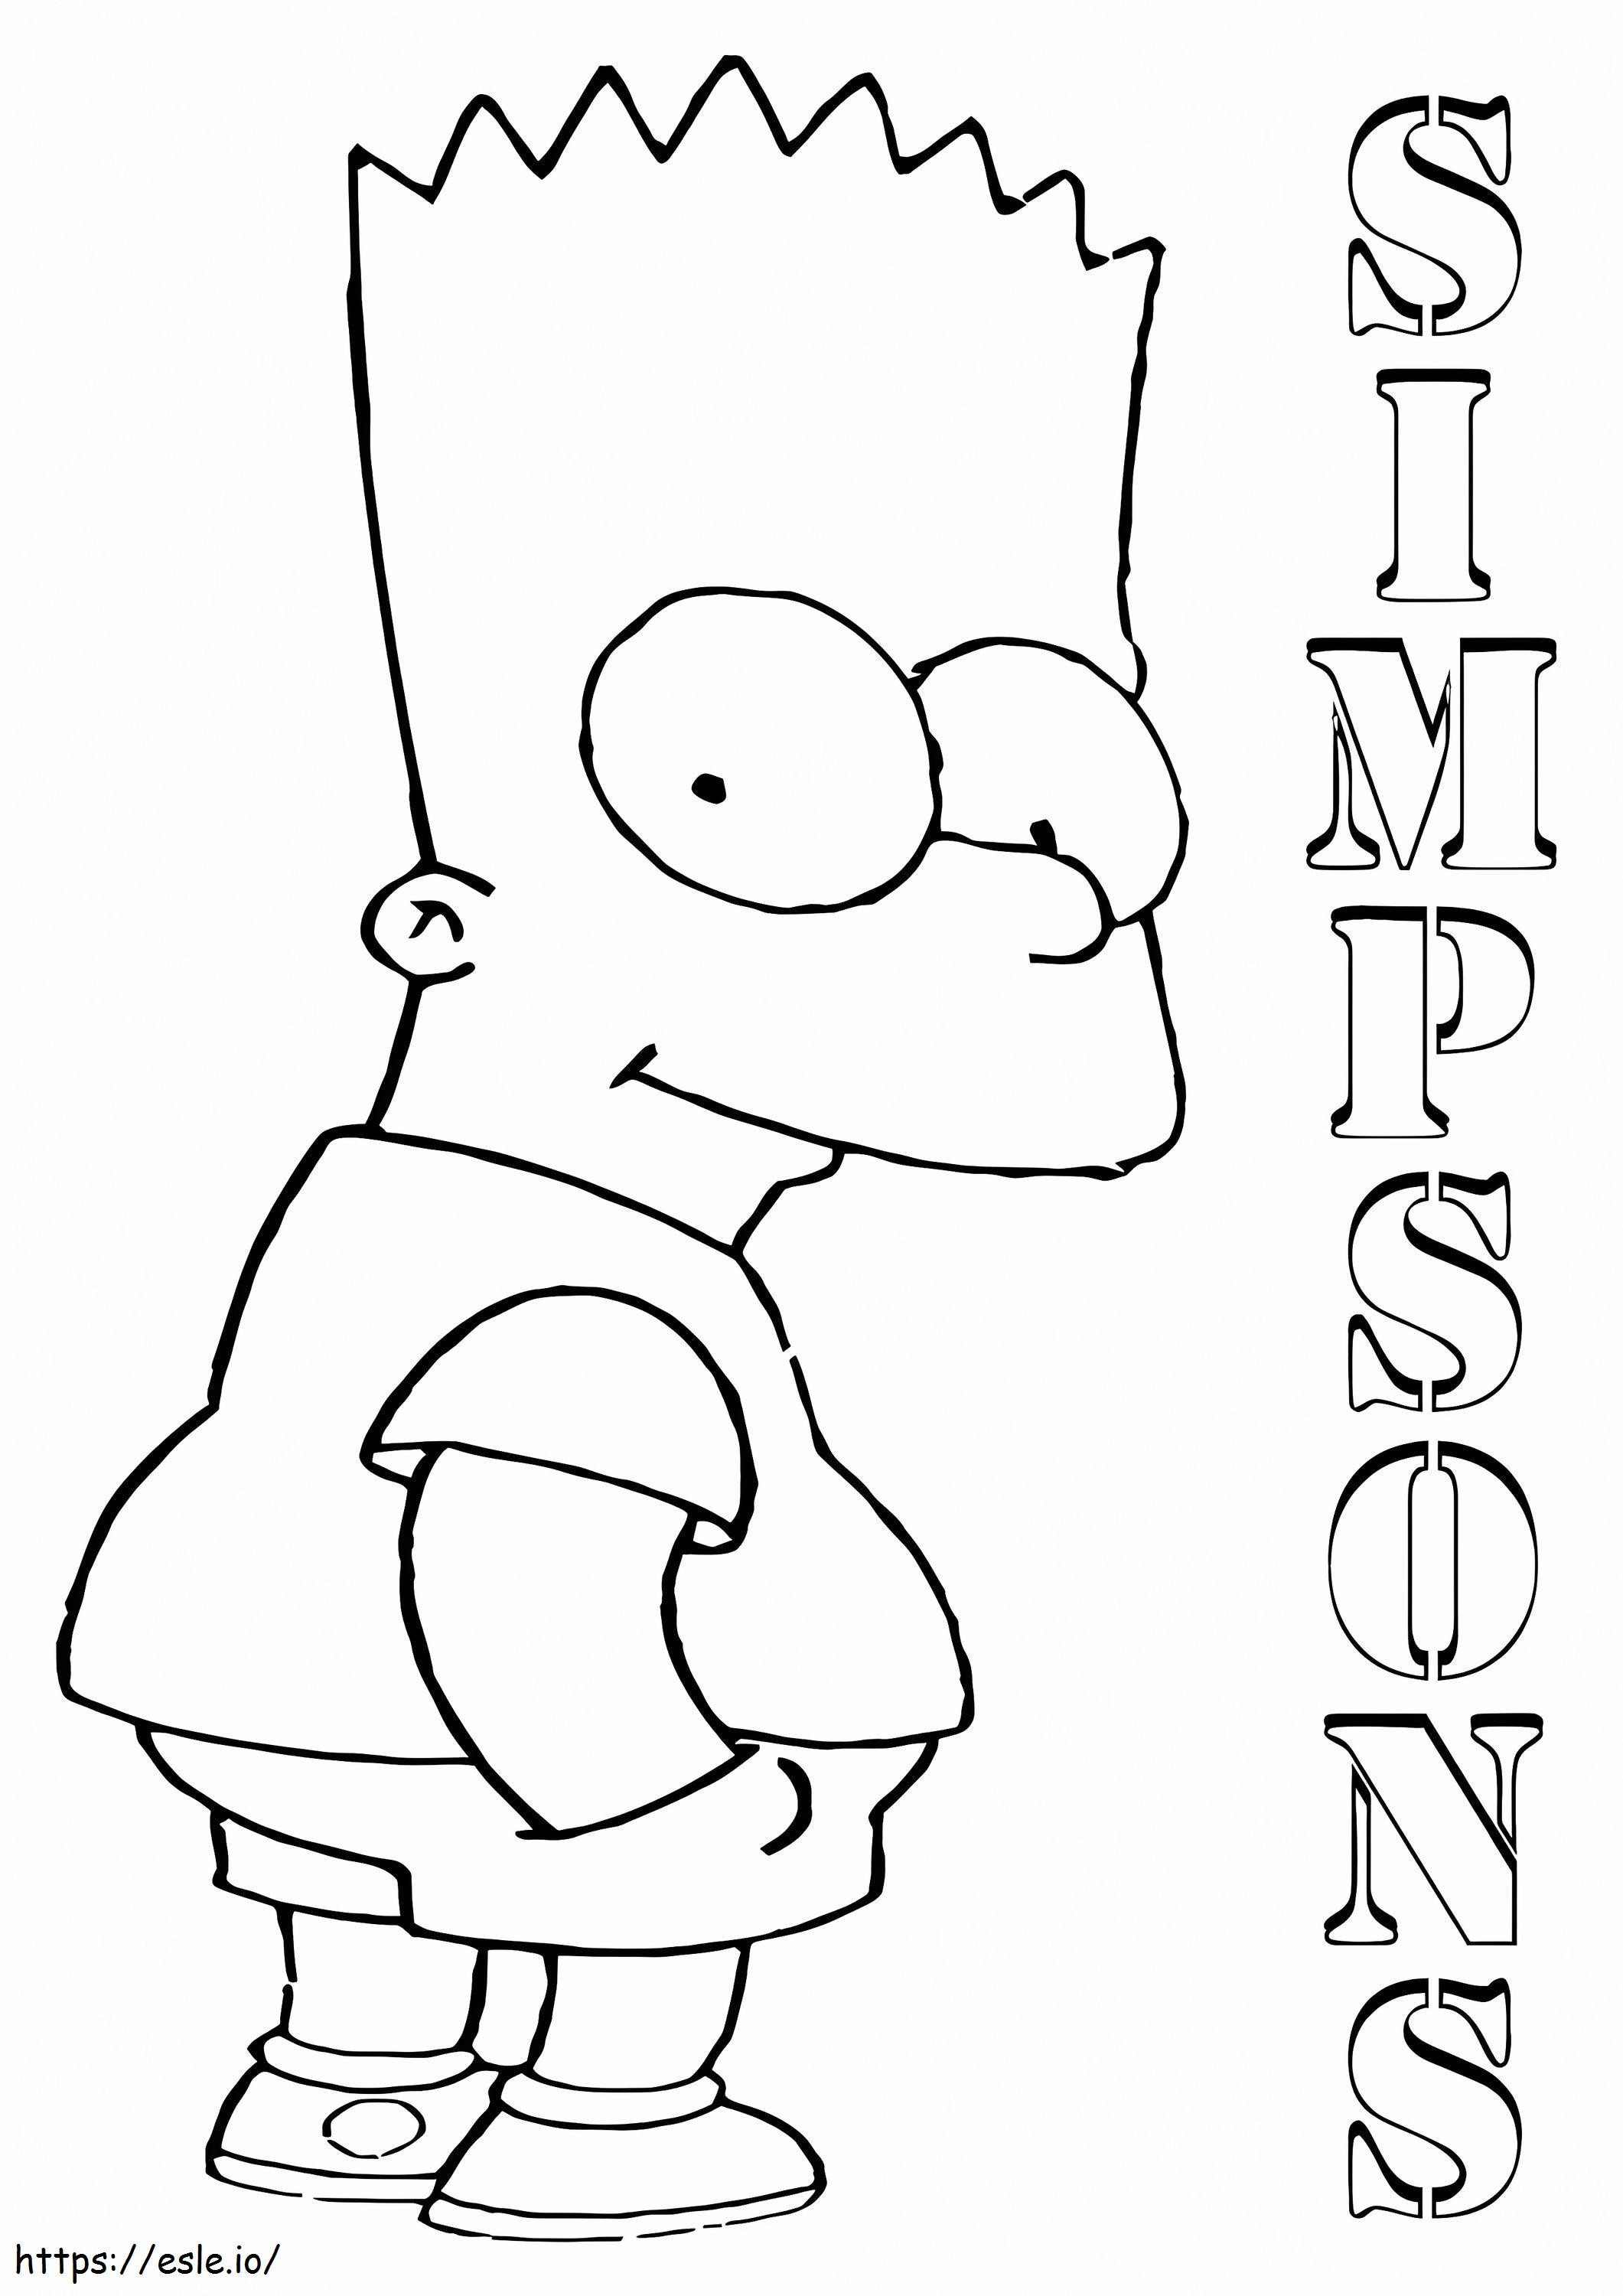 Bart Simpson 5 coloring page